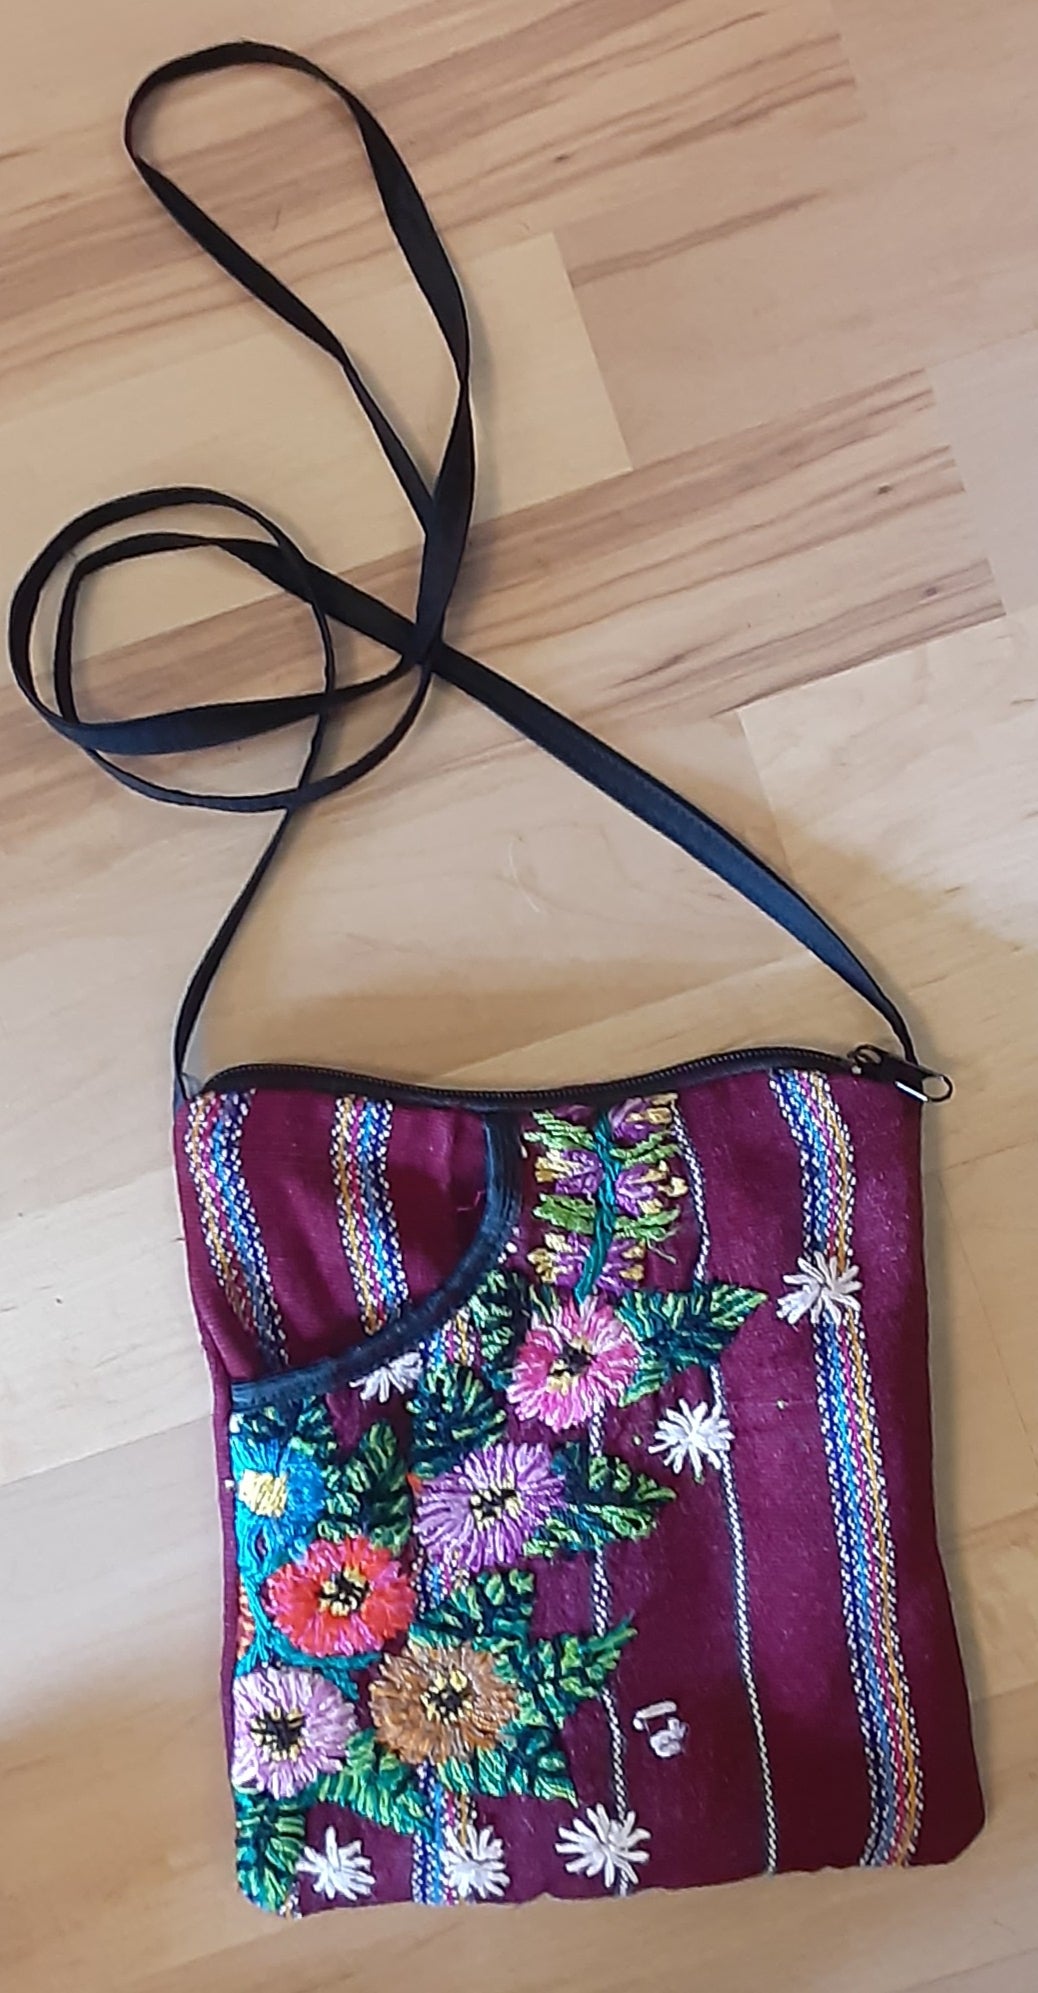 Guatemalan Embroidered Bag with Front Pocket for Cell Phone - Burgundy